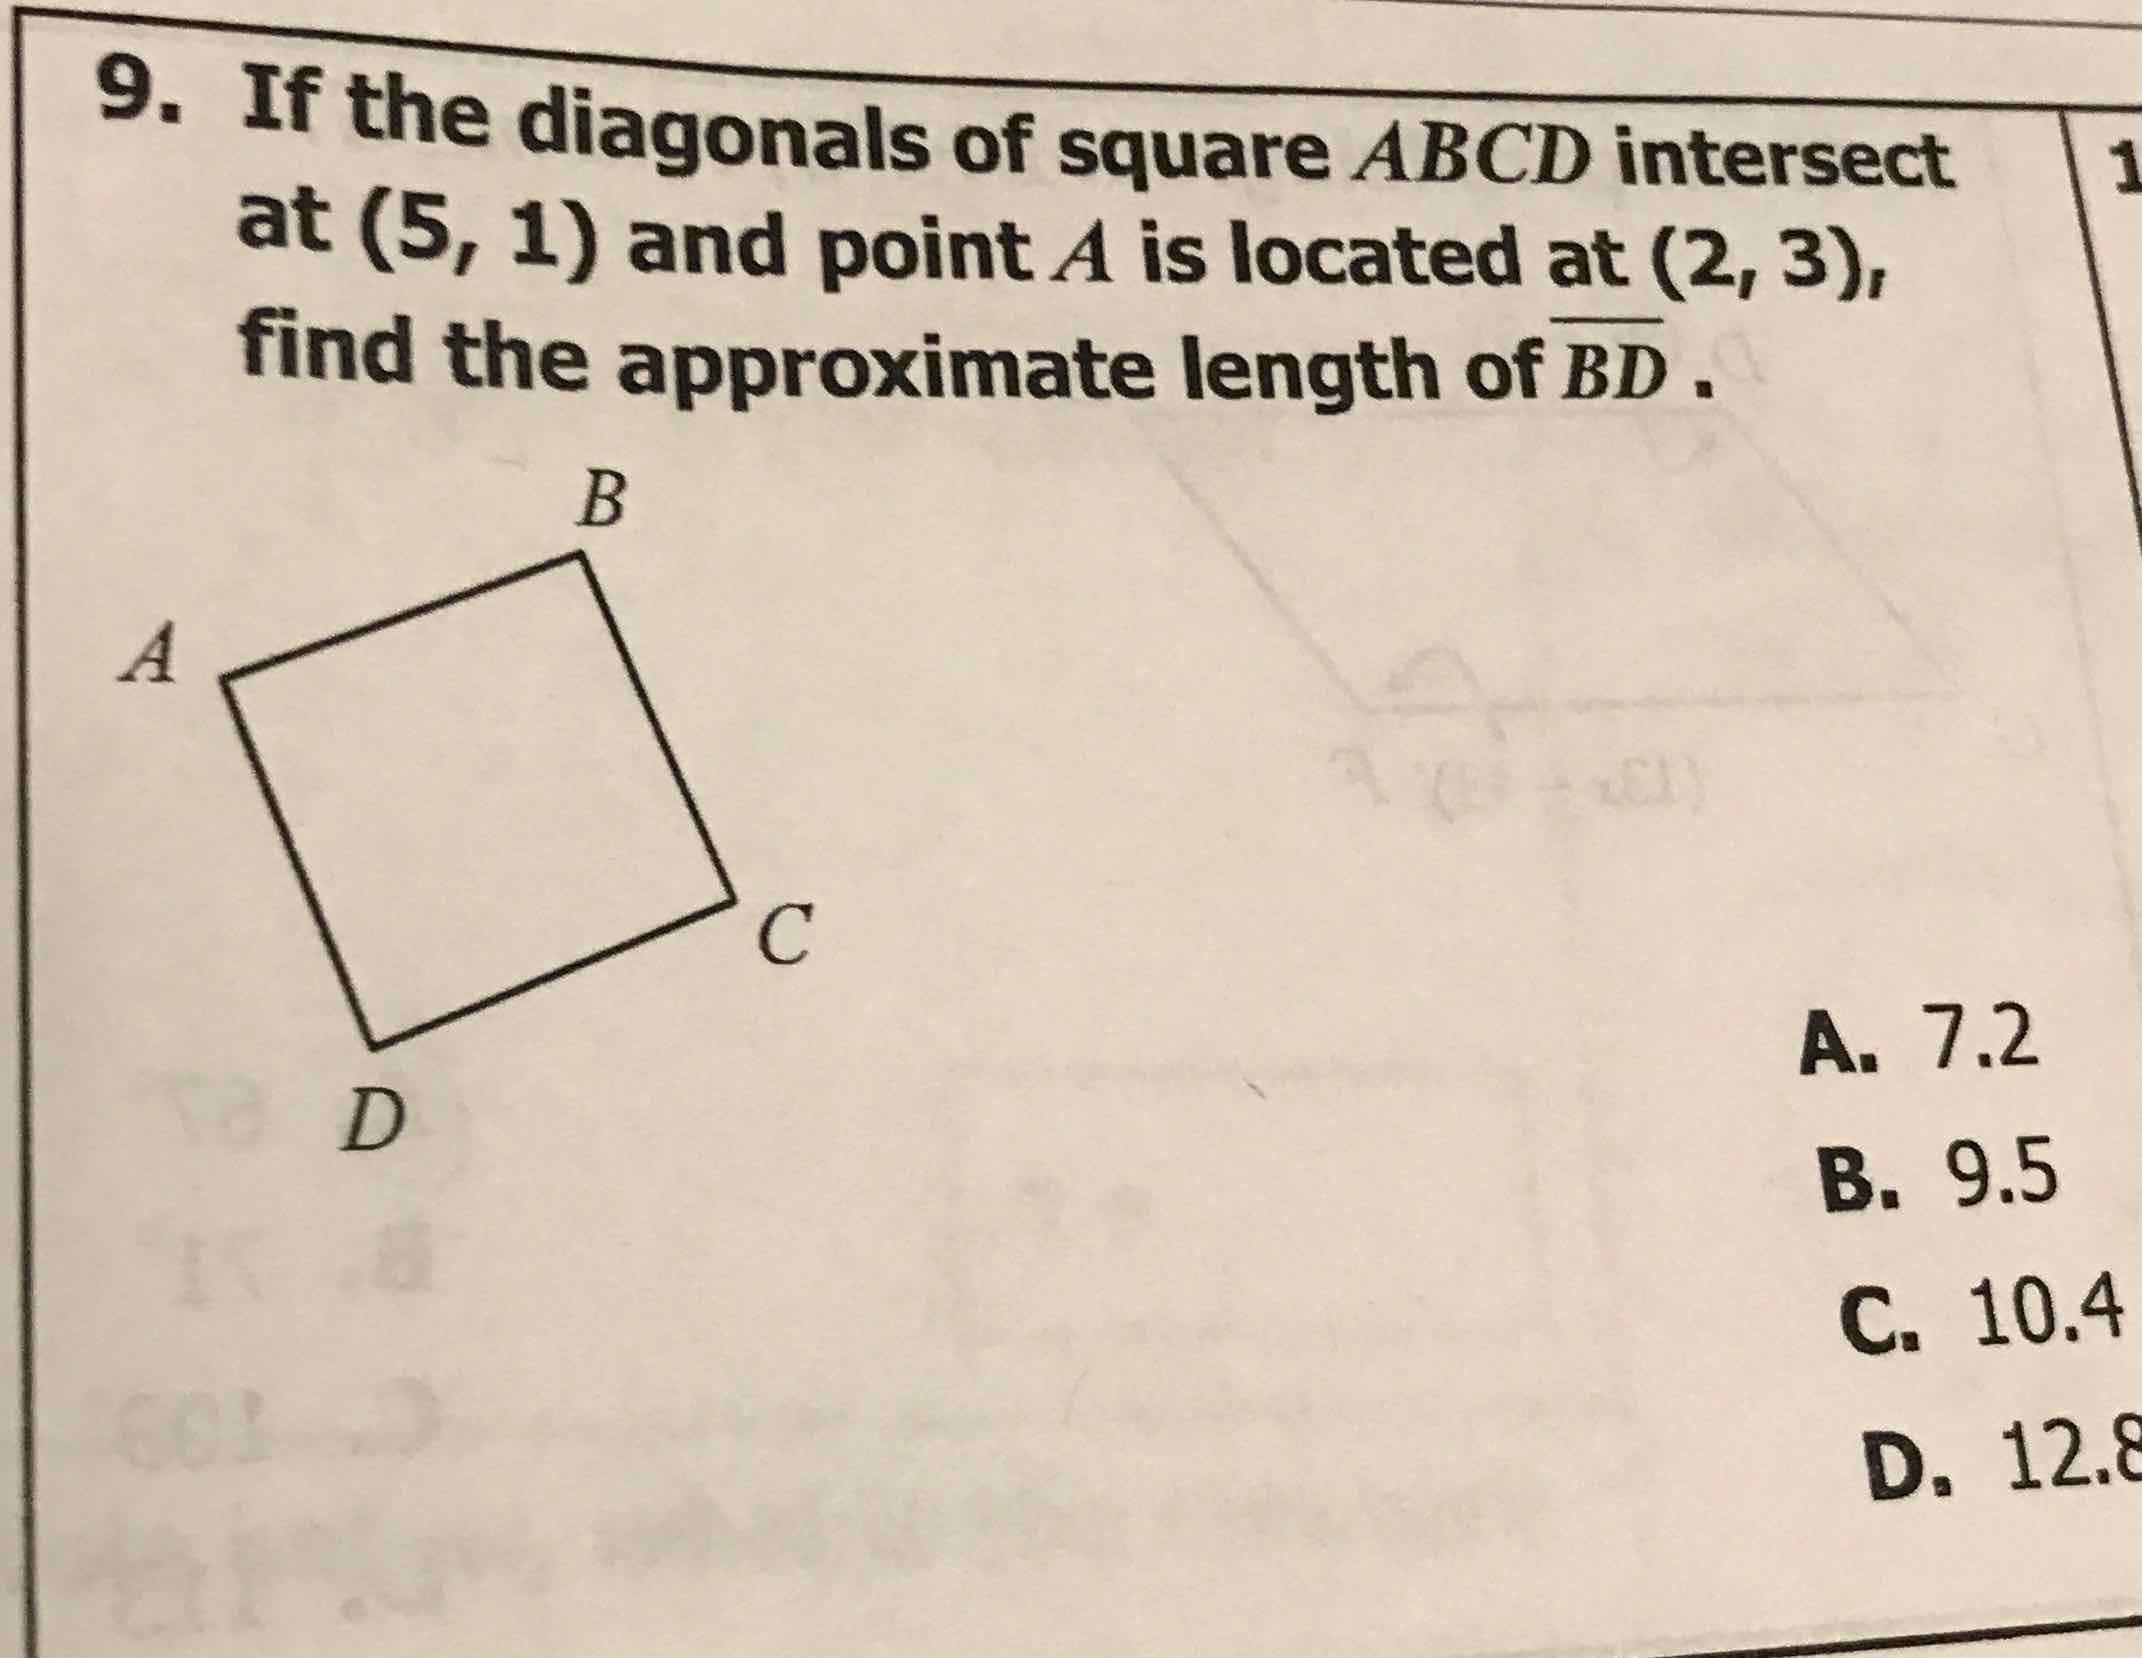 9. If the diagonals of square \( A B C D \) intersect at \( (5,1) \) and point \( A \) is located at \( (2,3) \), find the approximate length of \( \overline{B D} \).
A. \( 7.2 \)
B. \( 9.5 \)
C. \( 10.4 \)
D. \( 12.8 \)